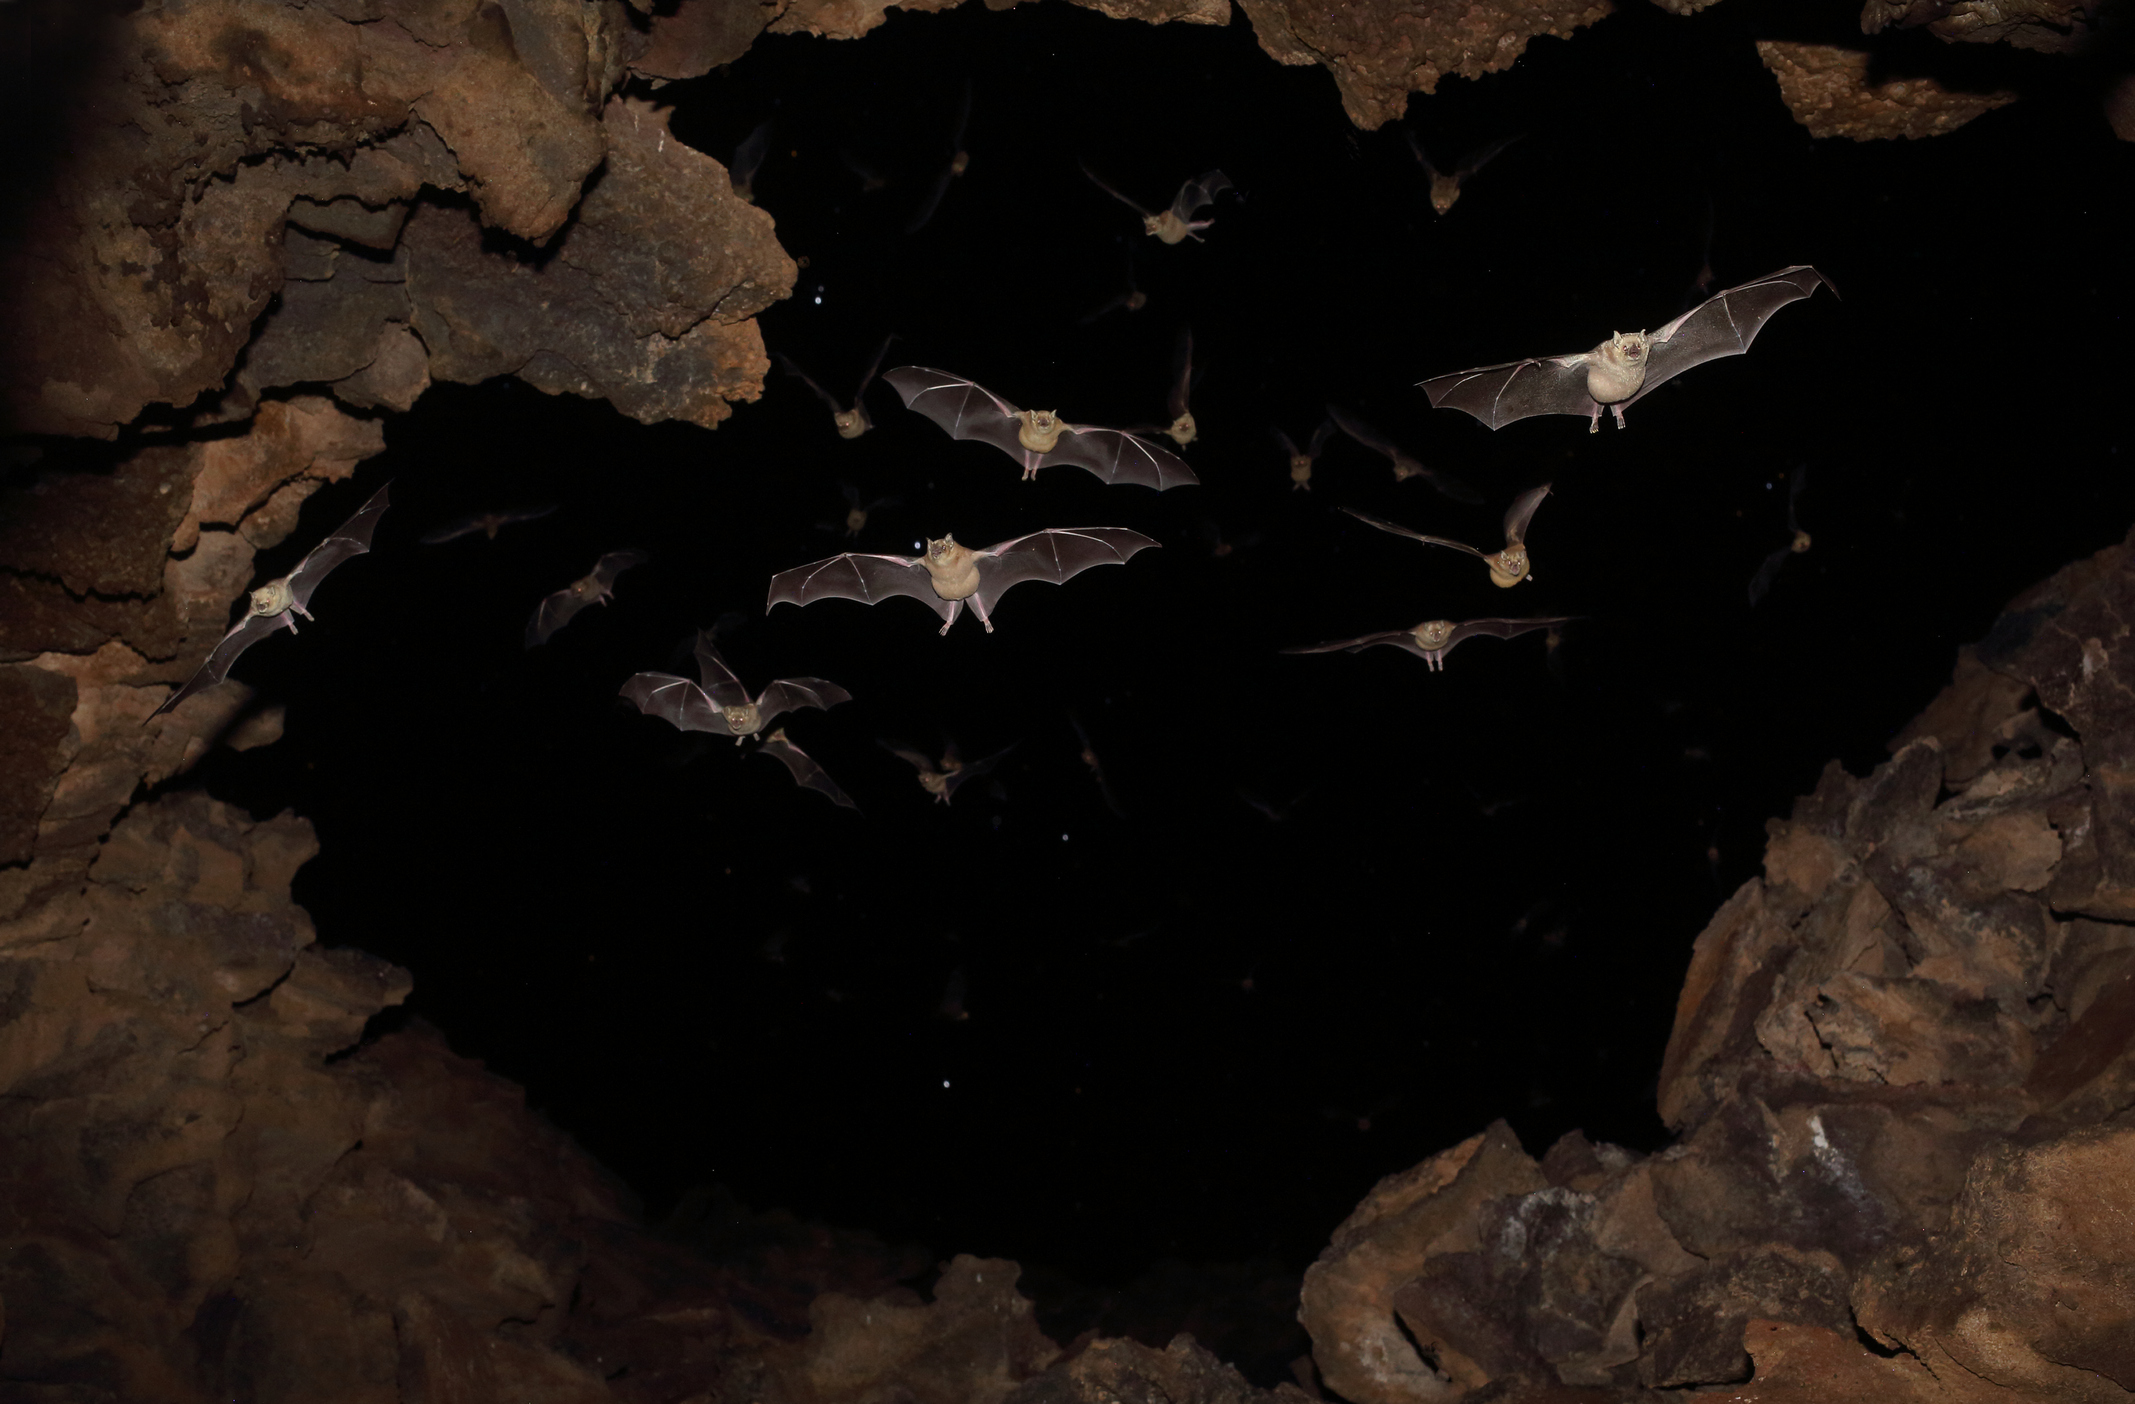 PHOTO: Bats are pictured flying in a cave in this undated stock photo.